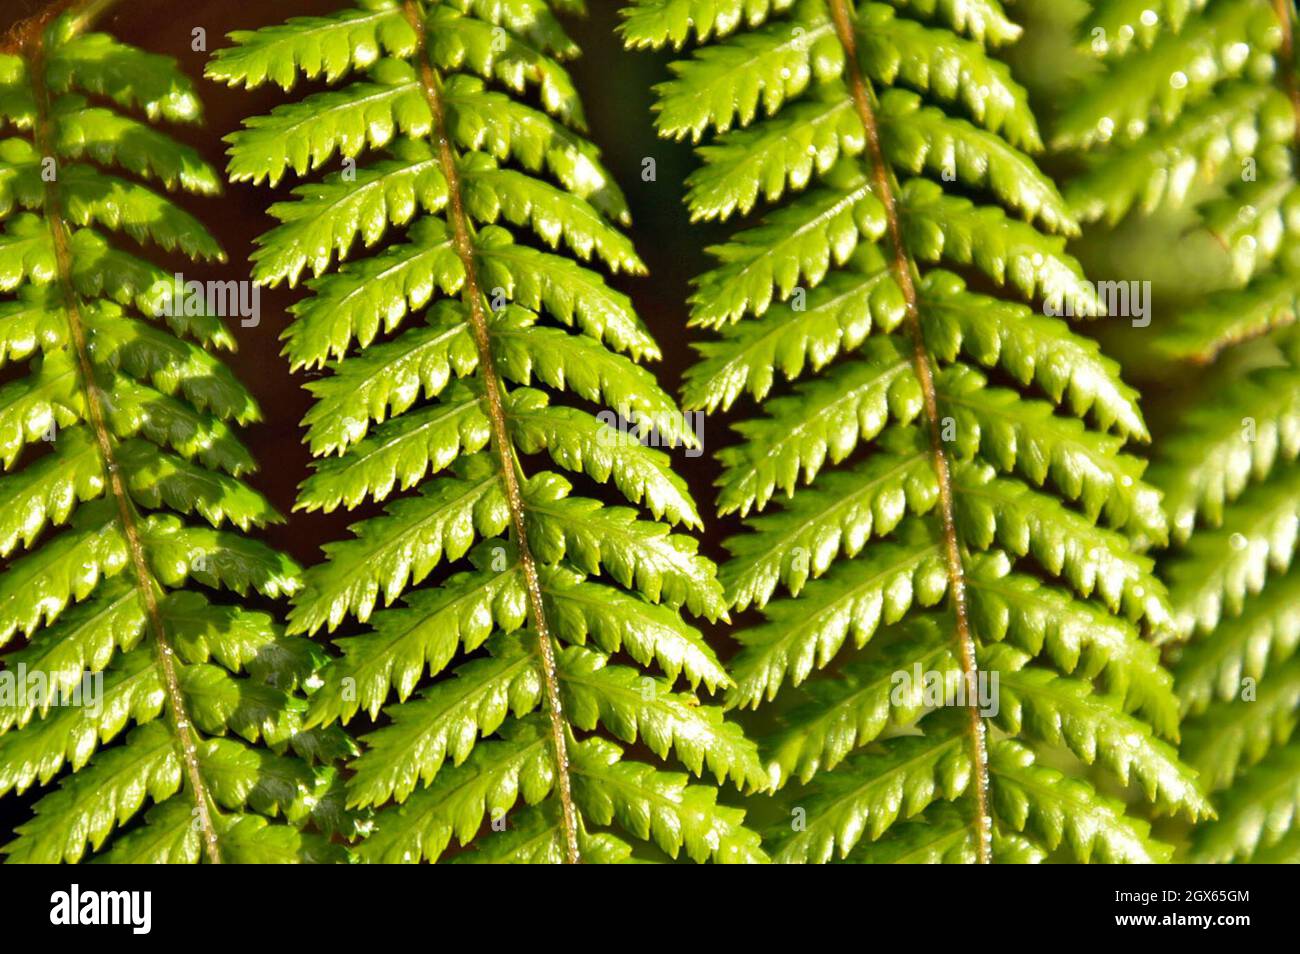 The silver fern, endemic to New Zealand, is symbolic and a source of identity for New Zealanders.  The fern was used historically by the Maori to mark night trails.  The flip-side of the green fern appears silver in the moonlight thus providing trail markings. Stock Photo